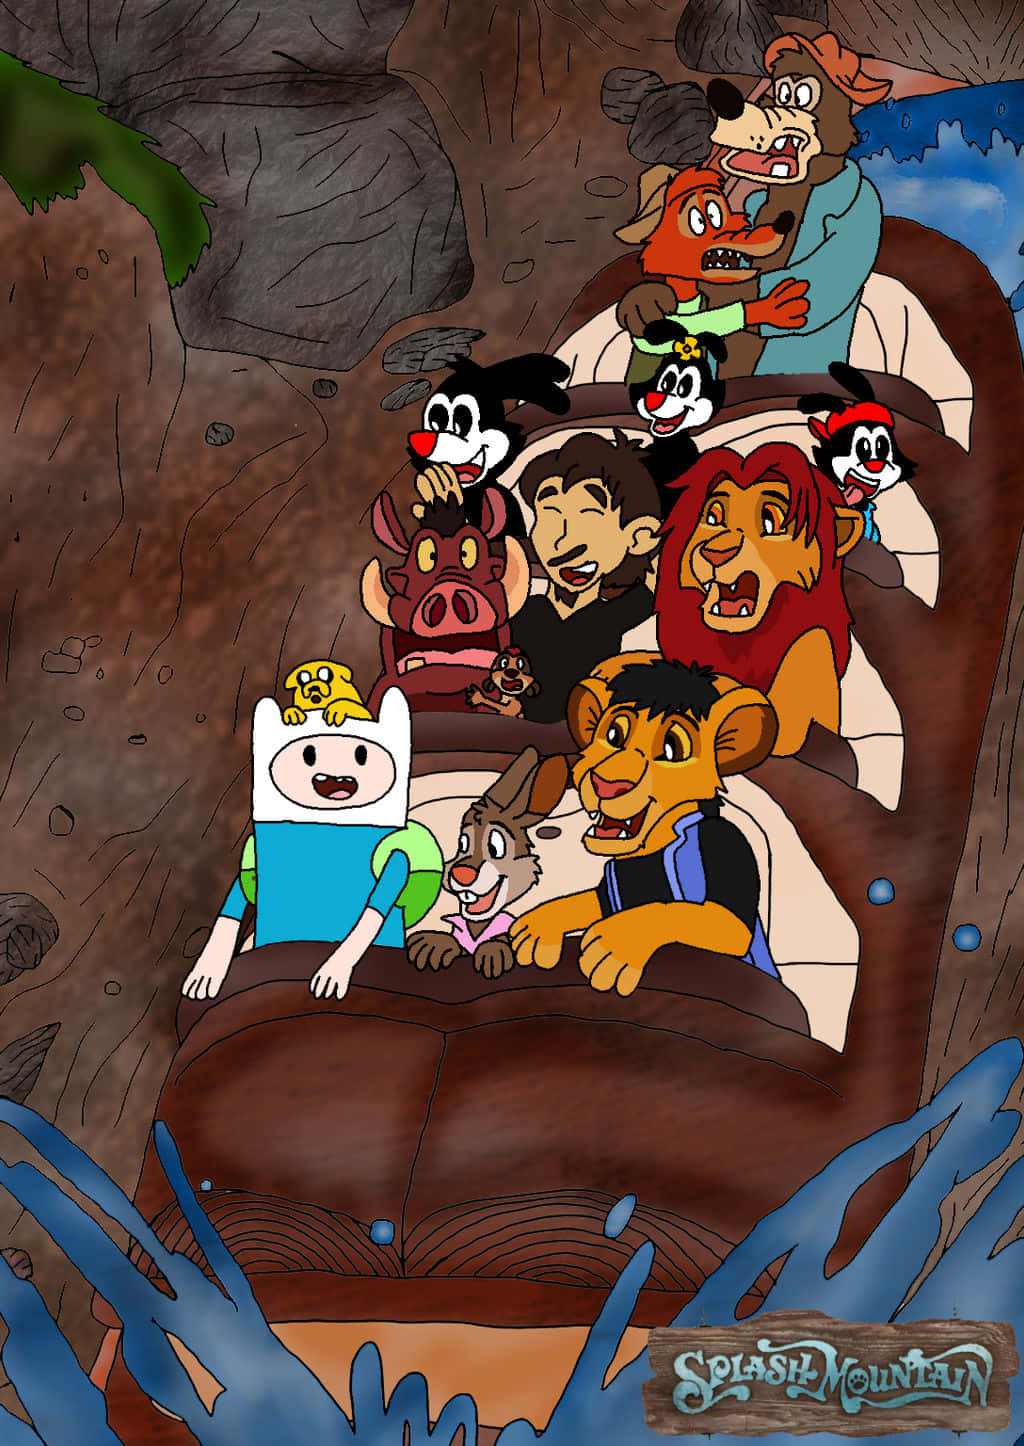 Elevate your spirits with a thrilling ride on Splash Mountain!